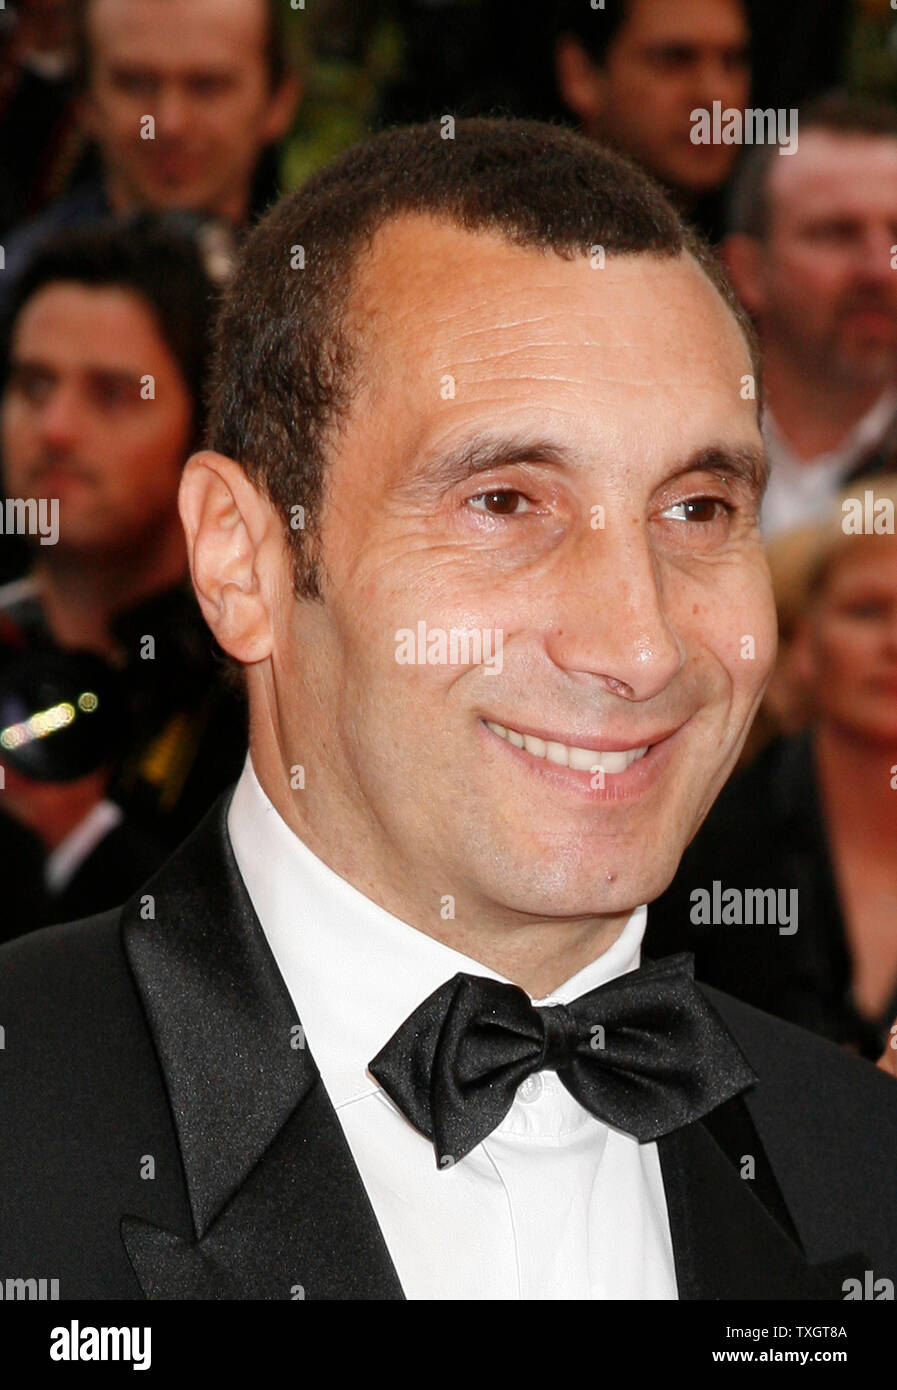 Actor Zinedine Soualem arrives on the red carpet before a screening of the film 'Un Conte de Noel (A Christmas Tale)' during the 61st Annual Cannes Film Festival in Cannes, France on May 16, 2008.   (UPI Photo/David Silpa) Stock Photo